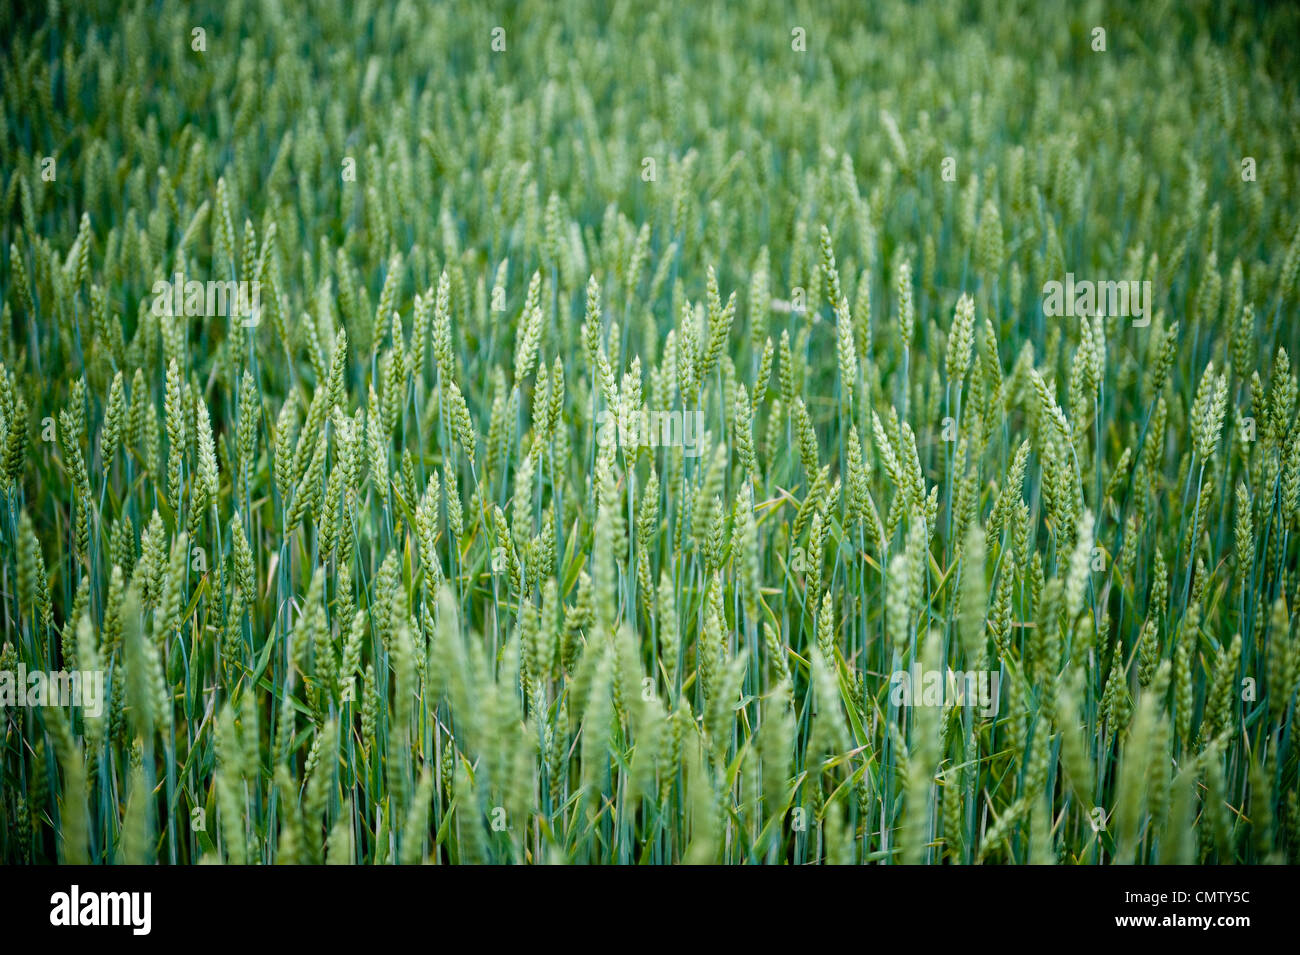 Green Crop High Resolution Stock Photography and Images - Alamy